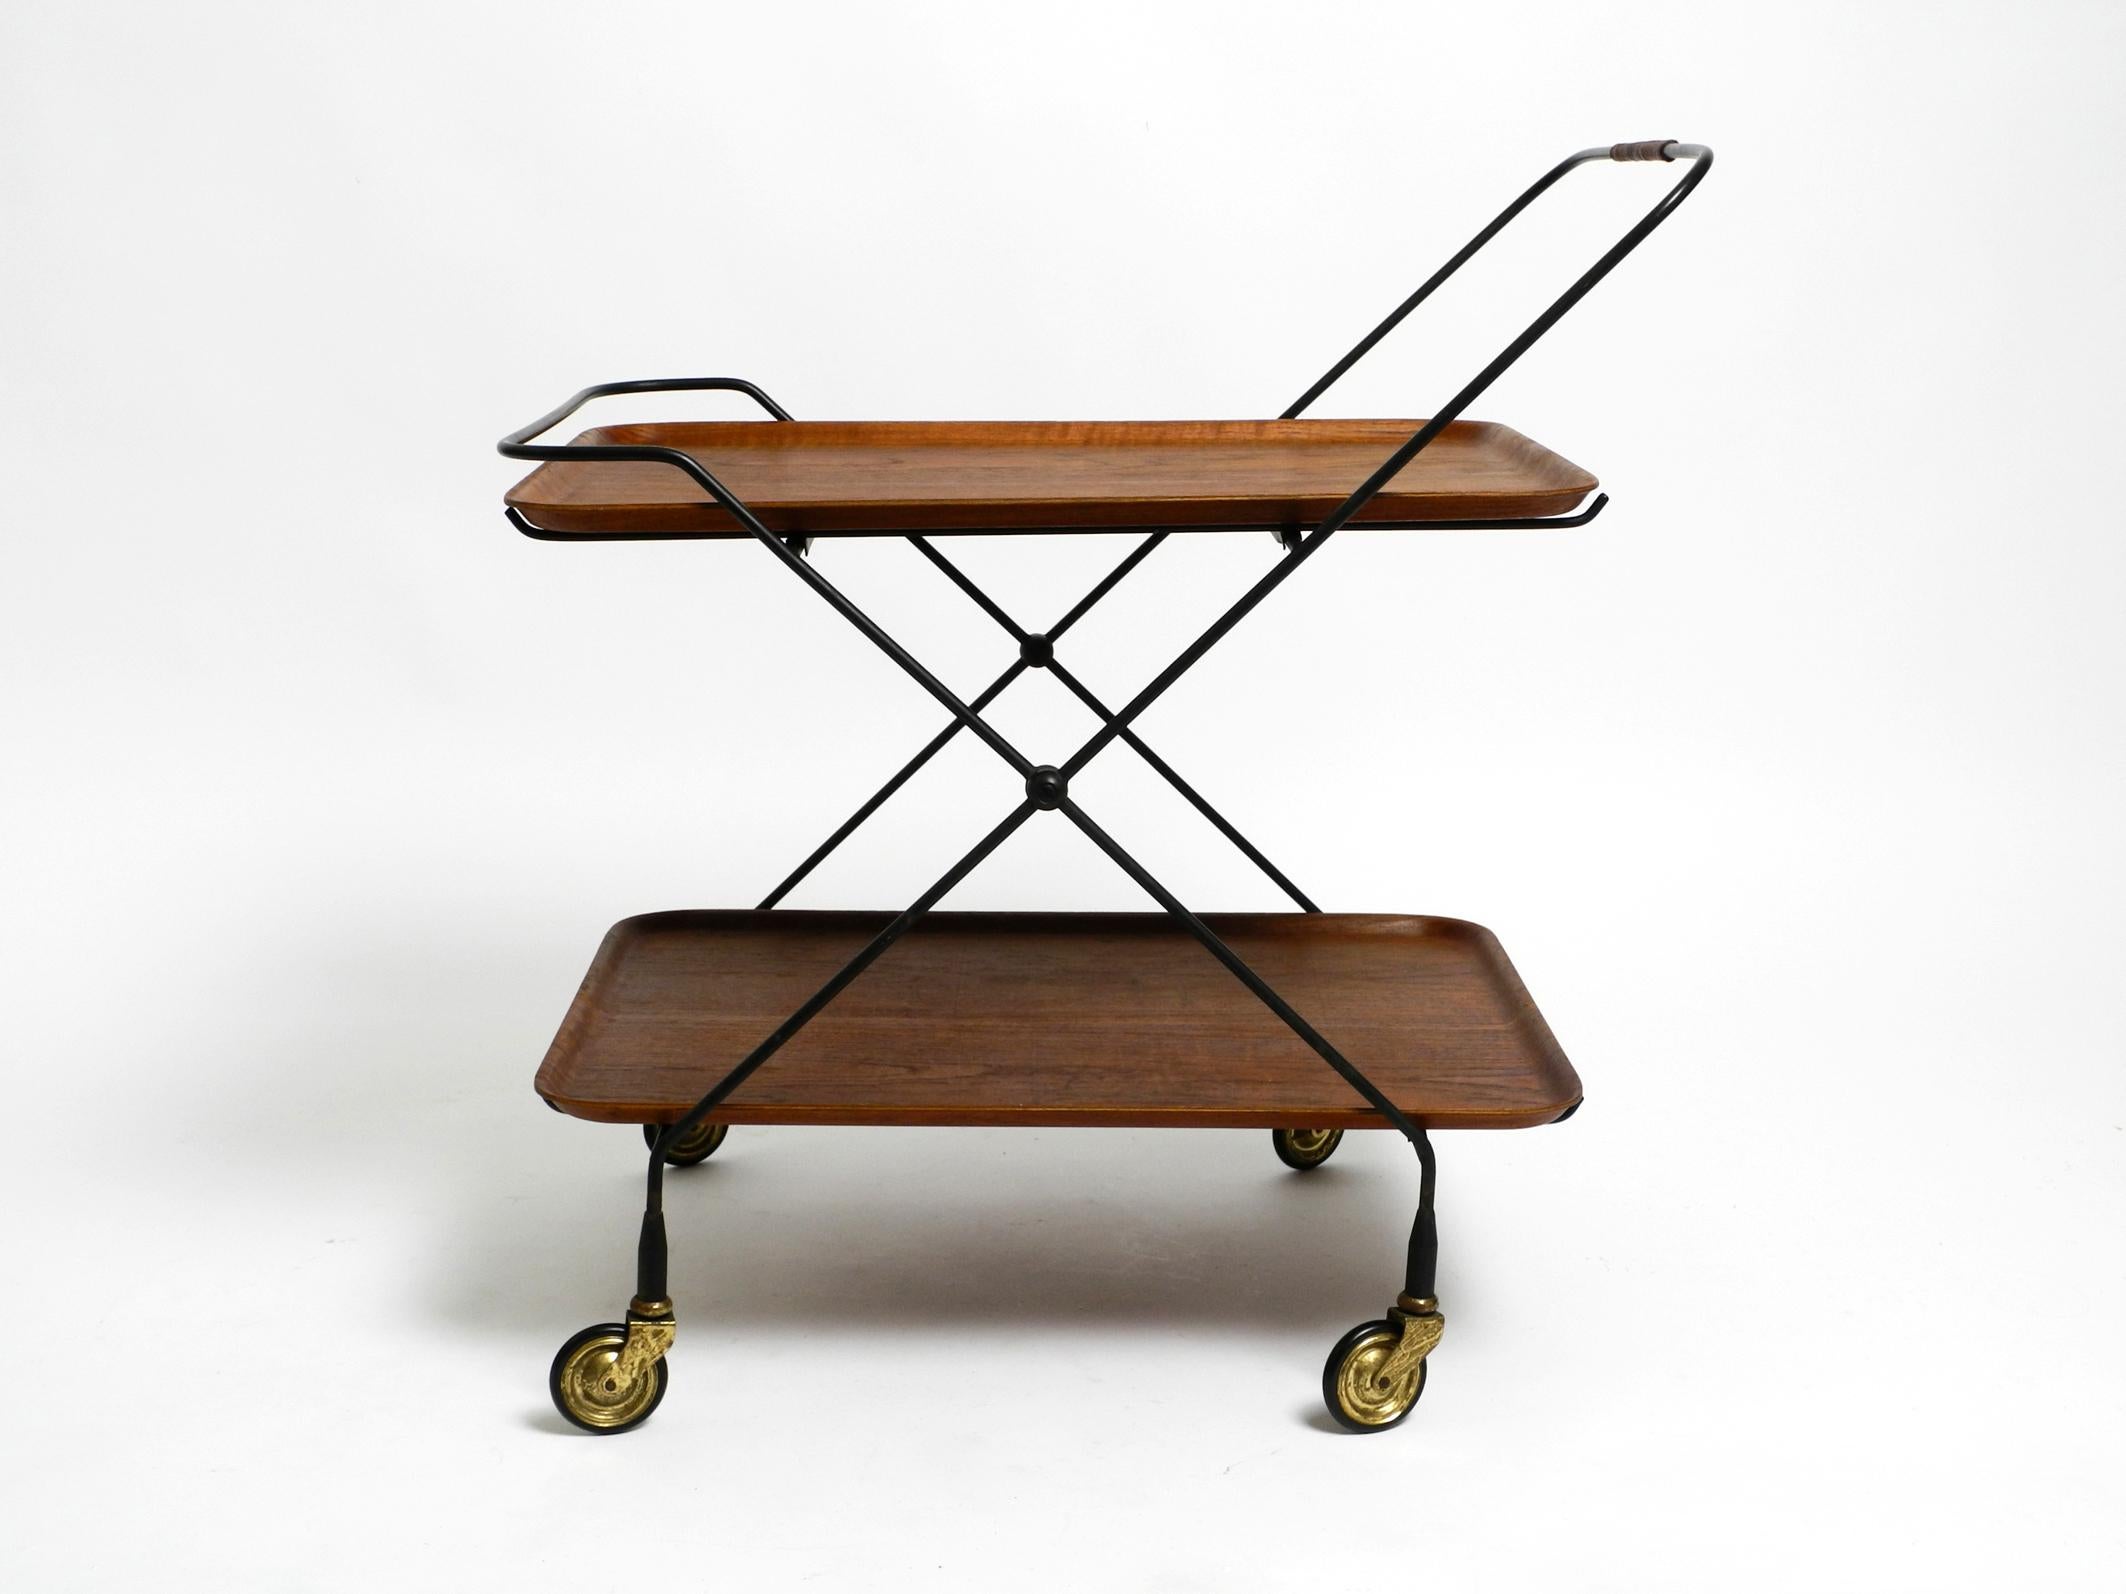 Beautiful original folding 1960s teak serving trolley or side table with wheels by Ary Fanérprodukter Nybro.
Made in Sweden. With original label on the bottom of one shelf. Shelves/ trays are removable.
Minimalist Scandinavian Mid Century